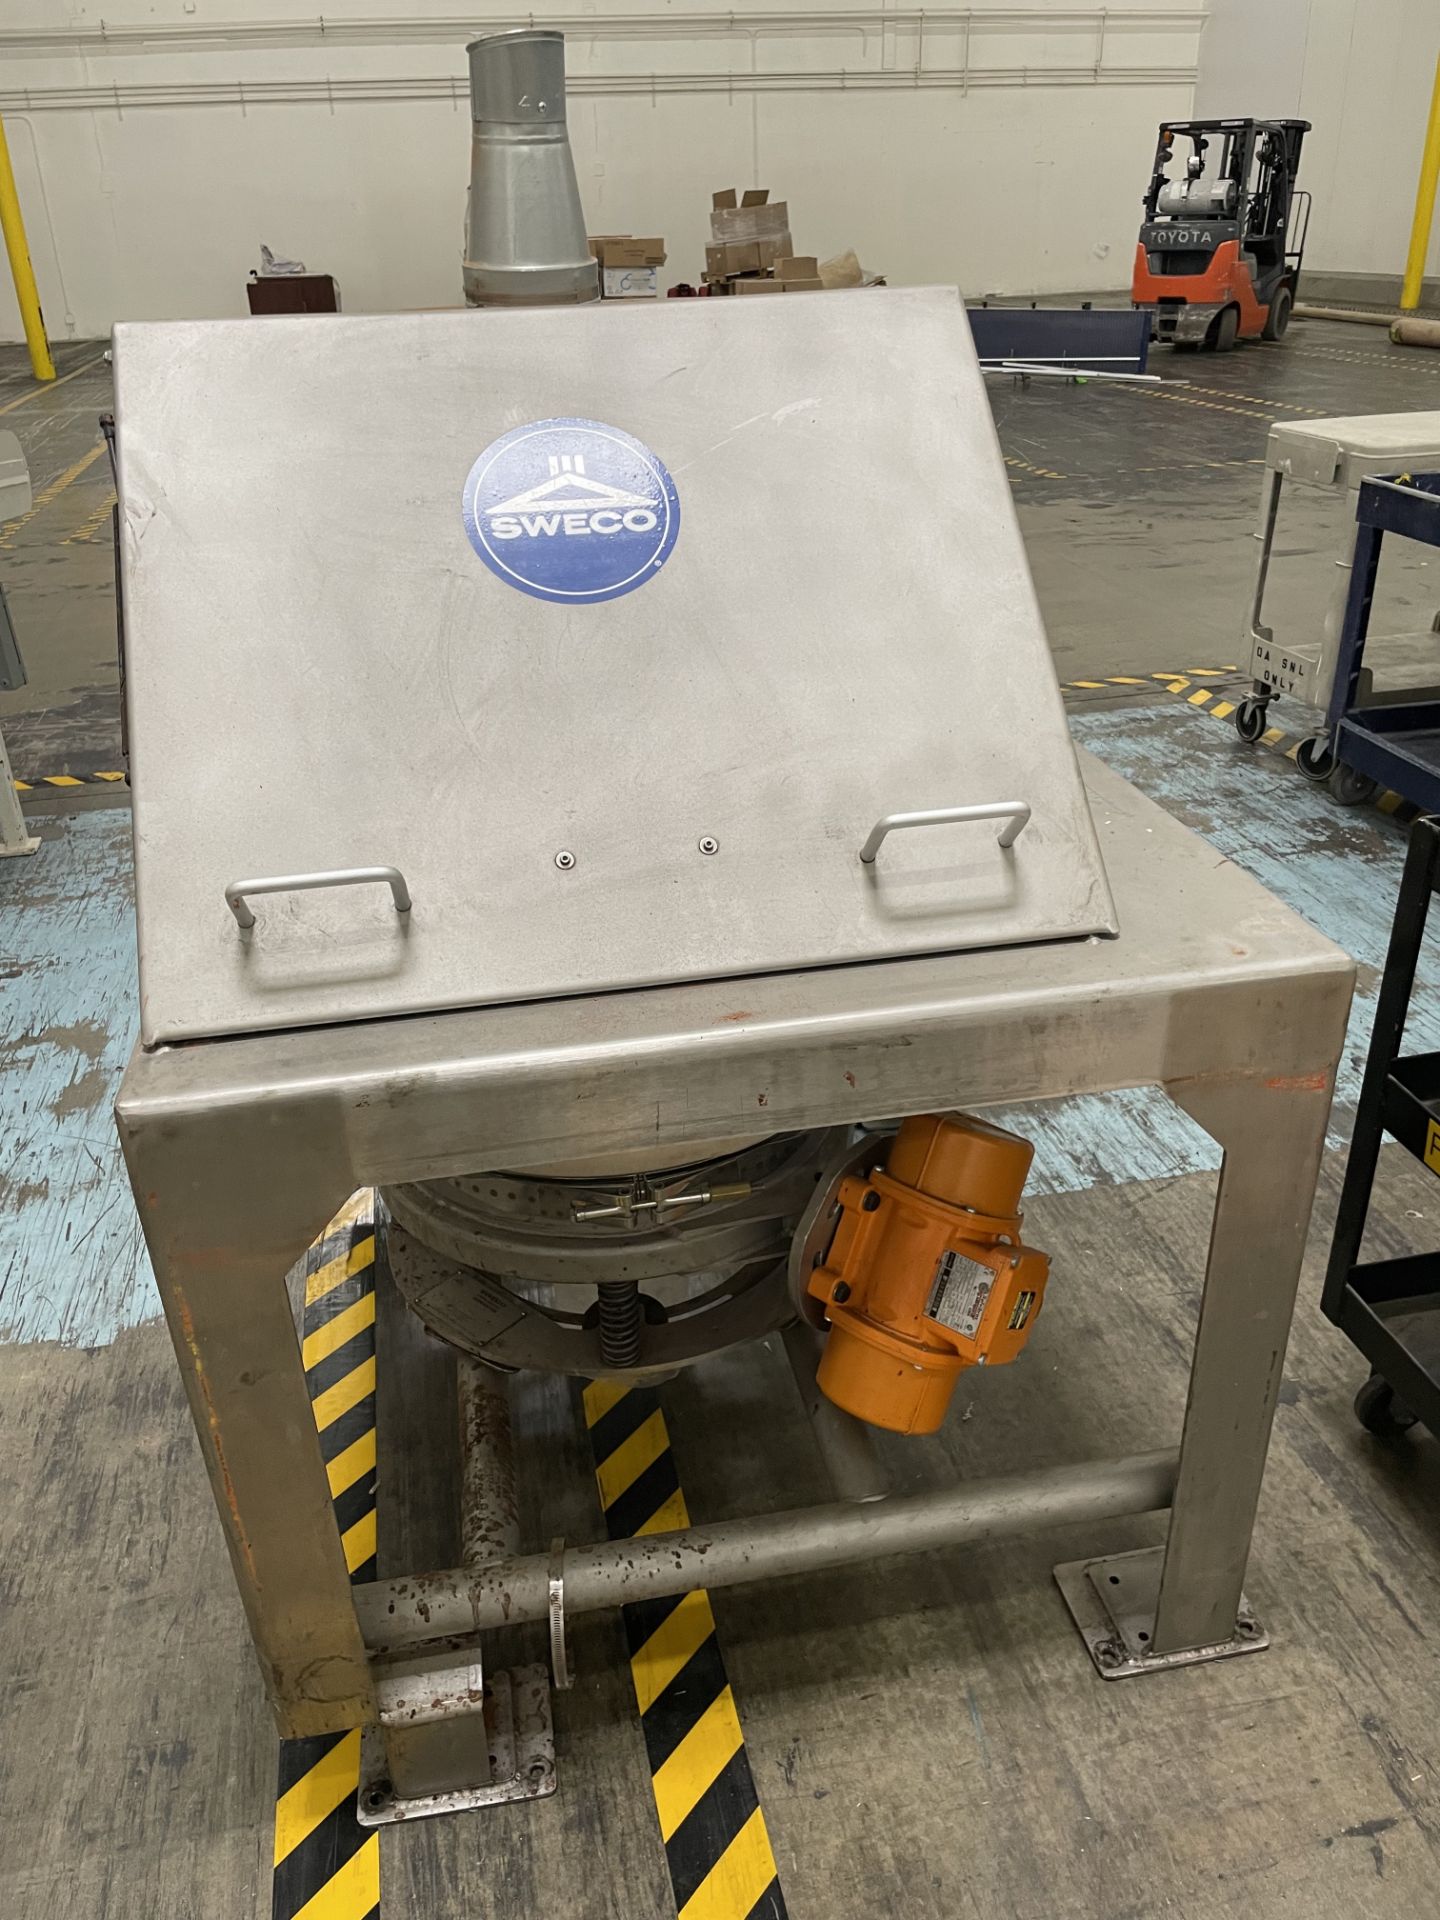 Sweco stainless steel hopper with valve and electric vibrator model MVSI 12-580, 230/460 VAC - Image 2 of 4